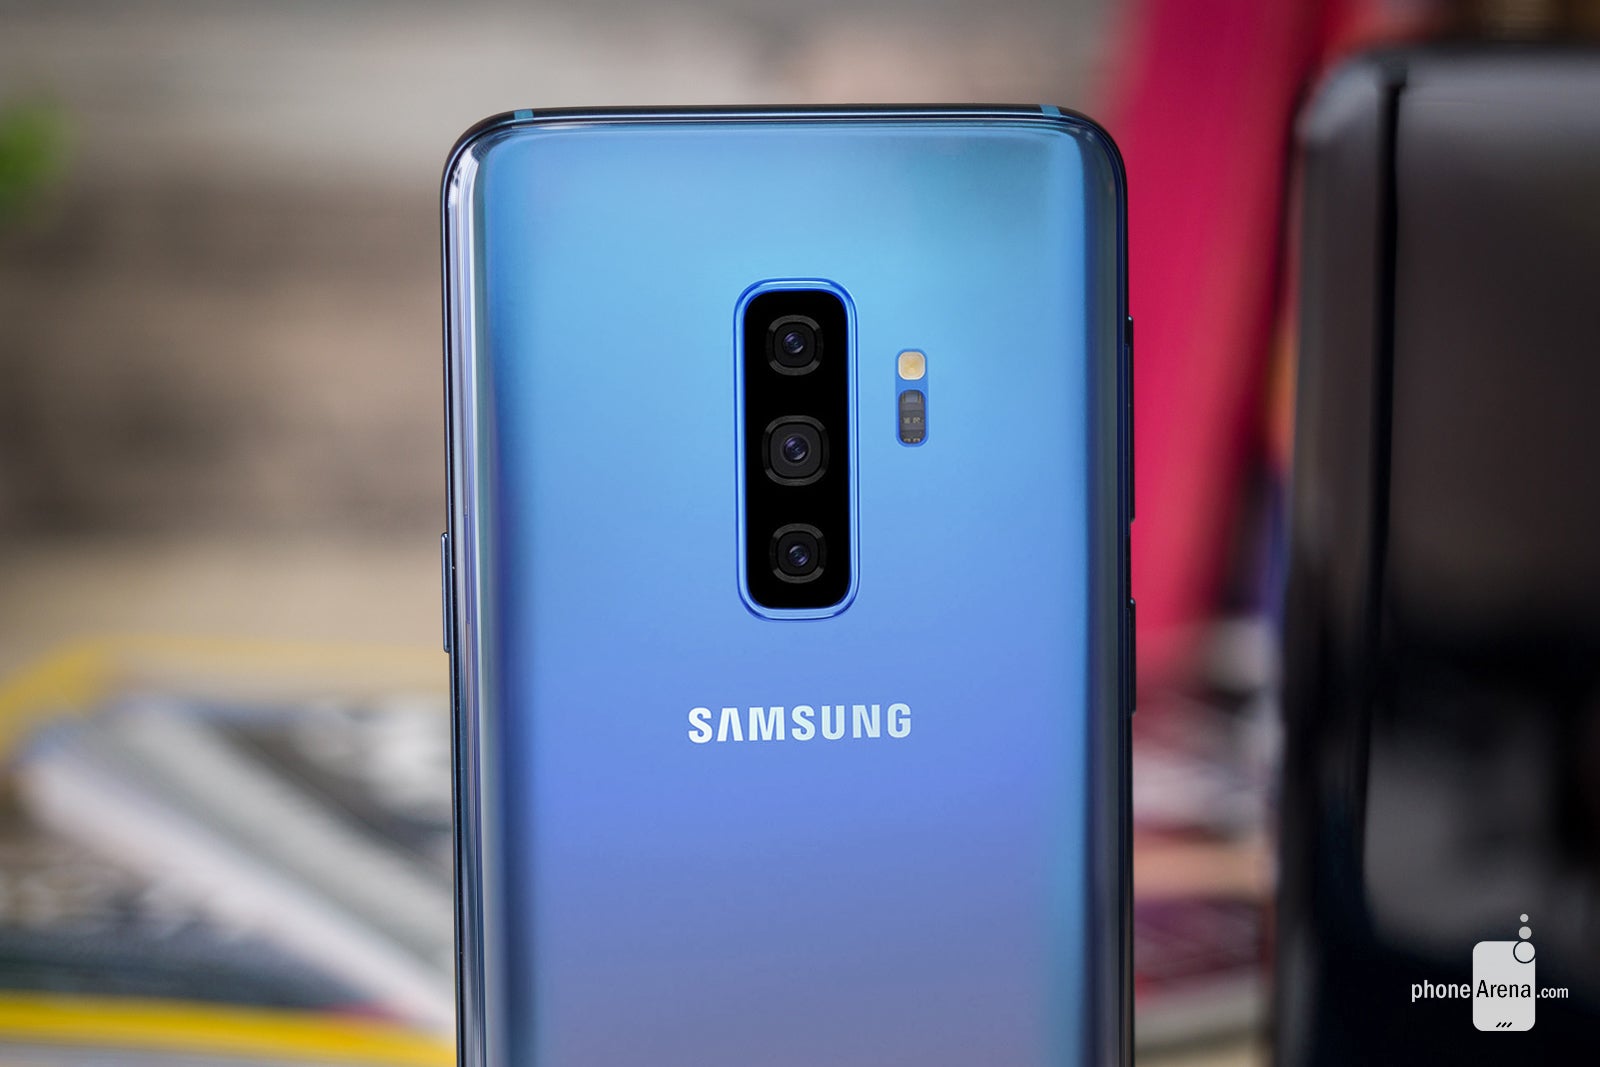 This is what the Galaxy S10 could look like: truly bezel-less with an under-display camera